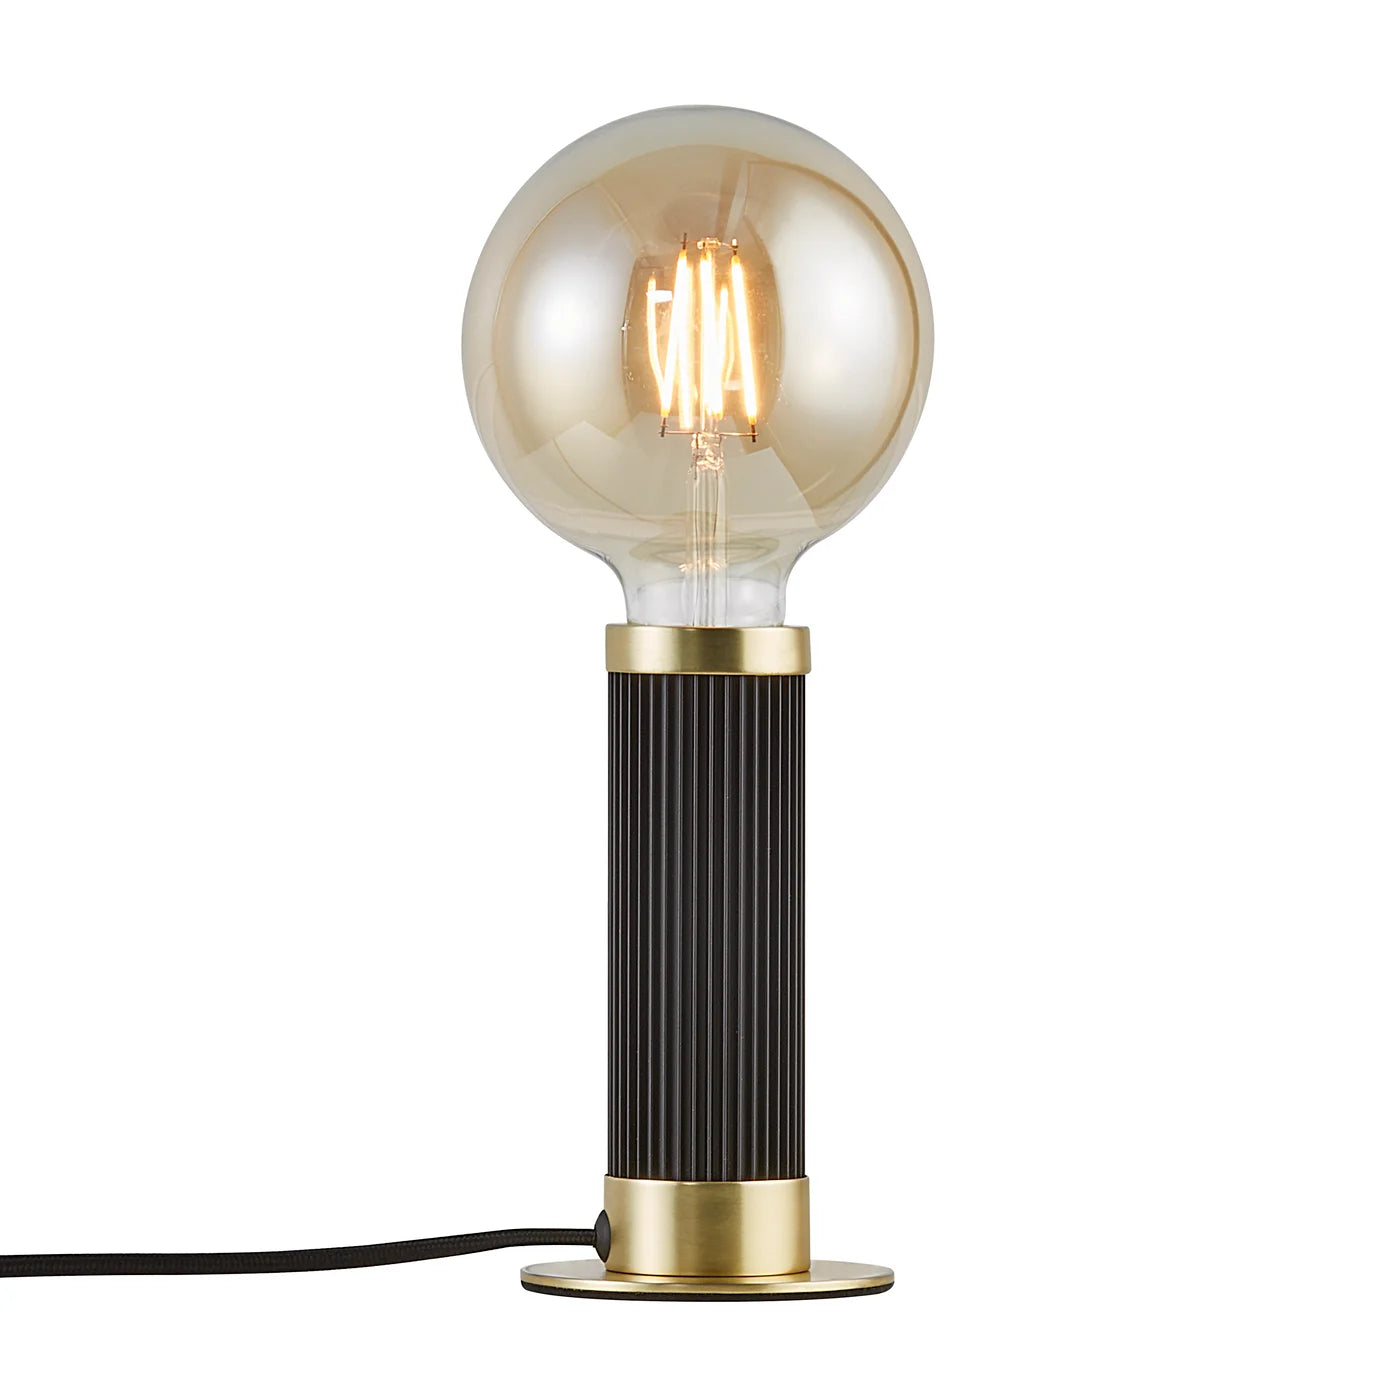 GALLOWAY table lamp black with gold details - Eye on Design